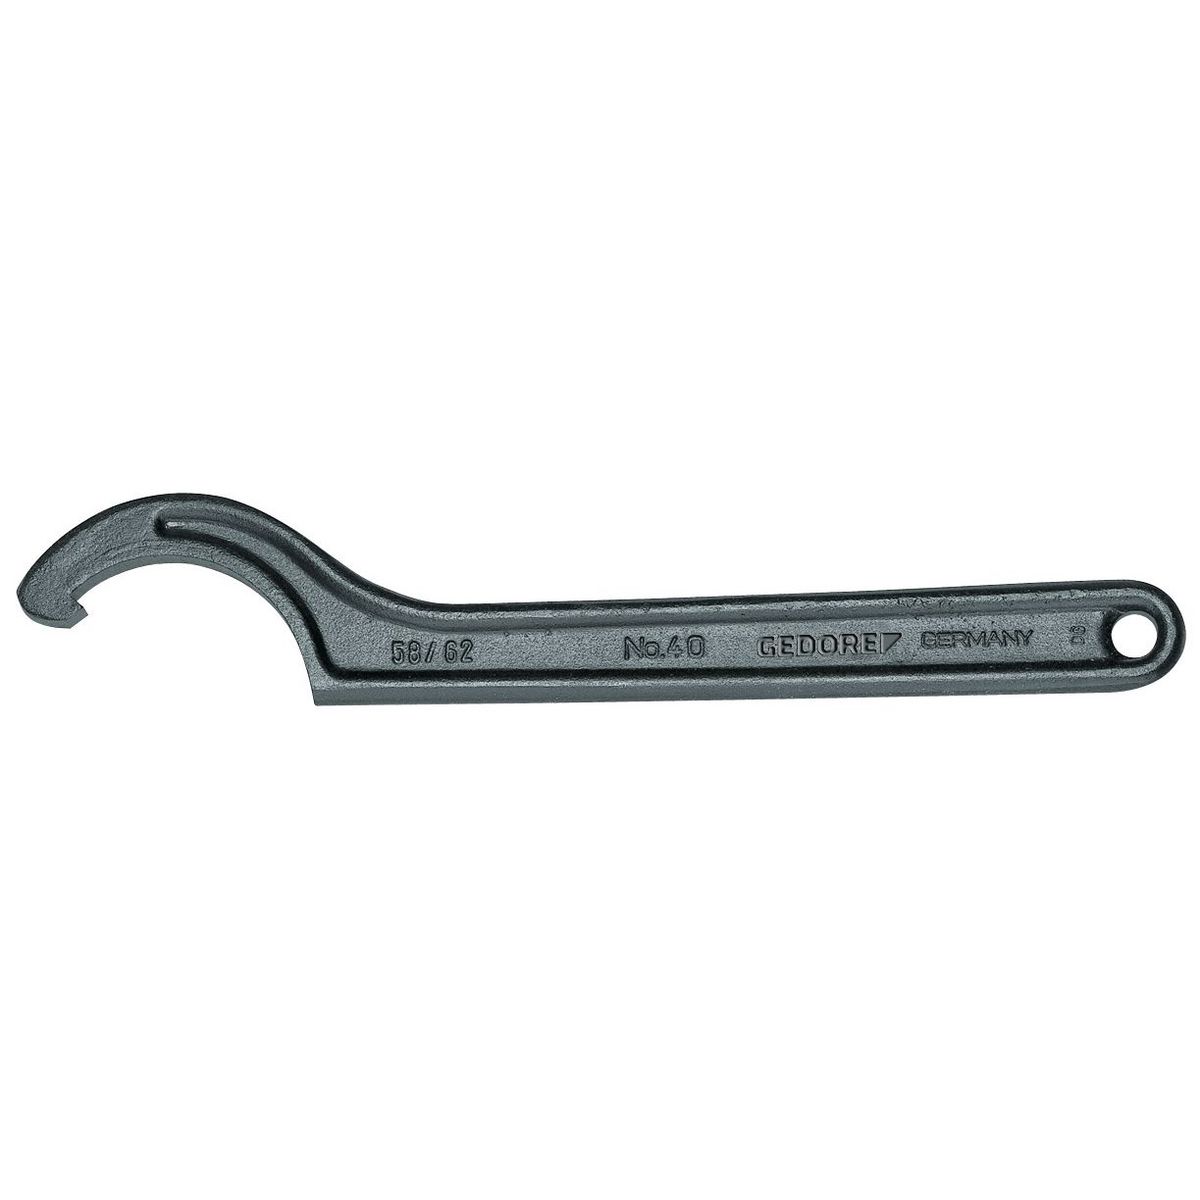 Hook wrench with lug, 25-28mm No.40 25-28 Gedore